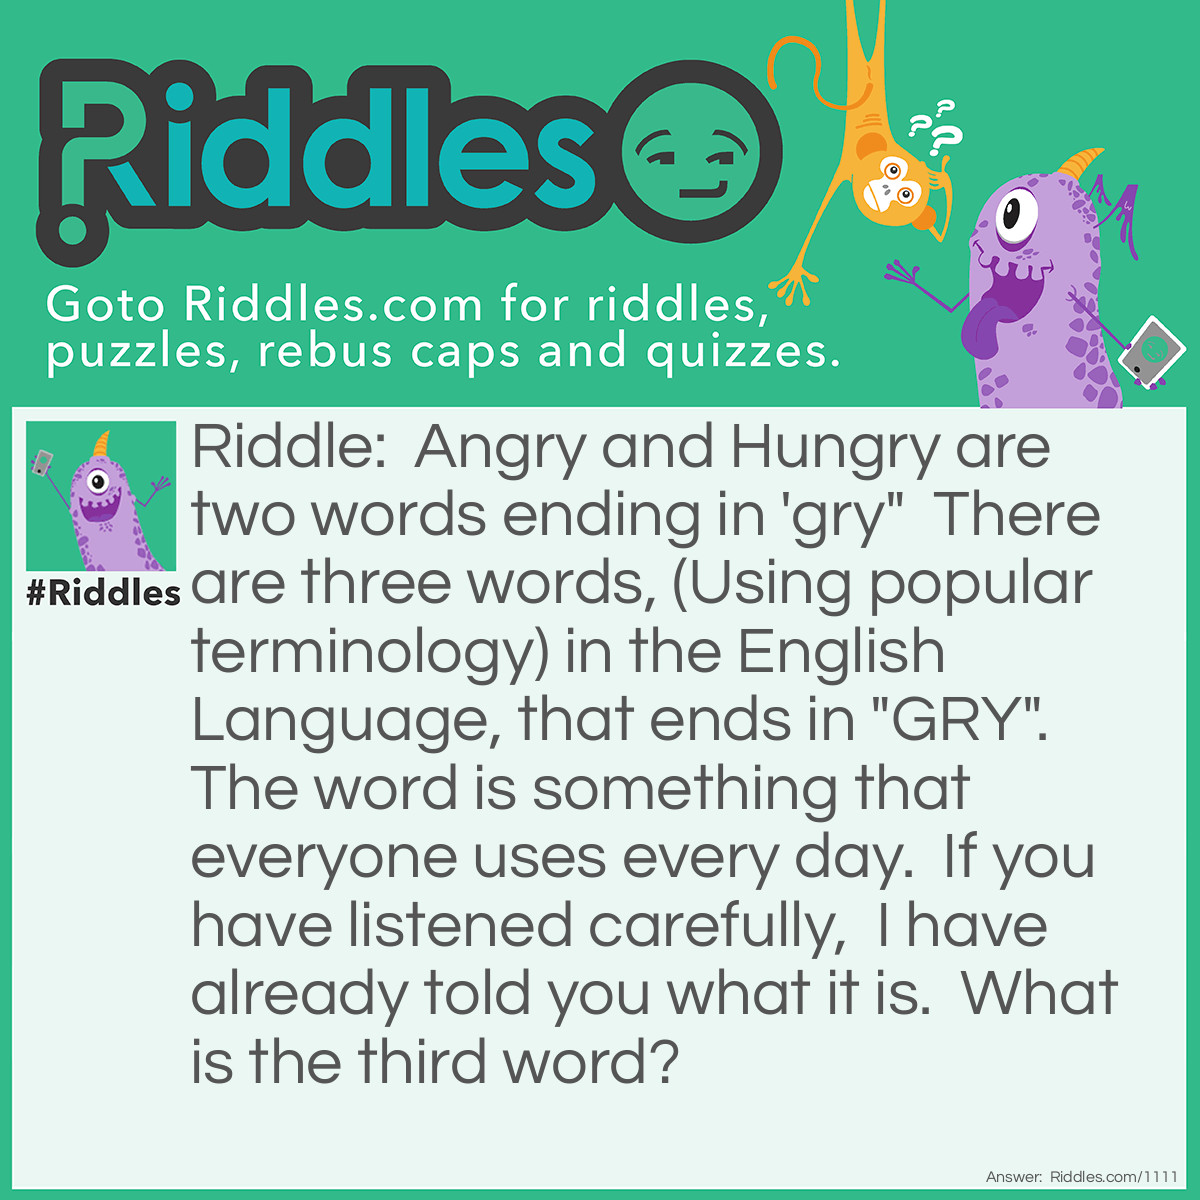 Riddle: Angry and Hungry are two words ending in 'gry" There are three words, (Using popular terminology) in the English Language, that end in "GRY".  . What is the third word?  The word is something that everyone uses every day.  If you have listened carefully,  I have already told you what it is. Answer: Answer is terminology. (It's the third word ending in gry. Usin(g) popula(r) teminolog(y)